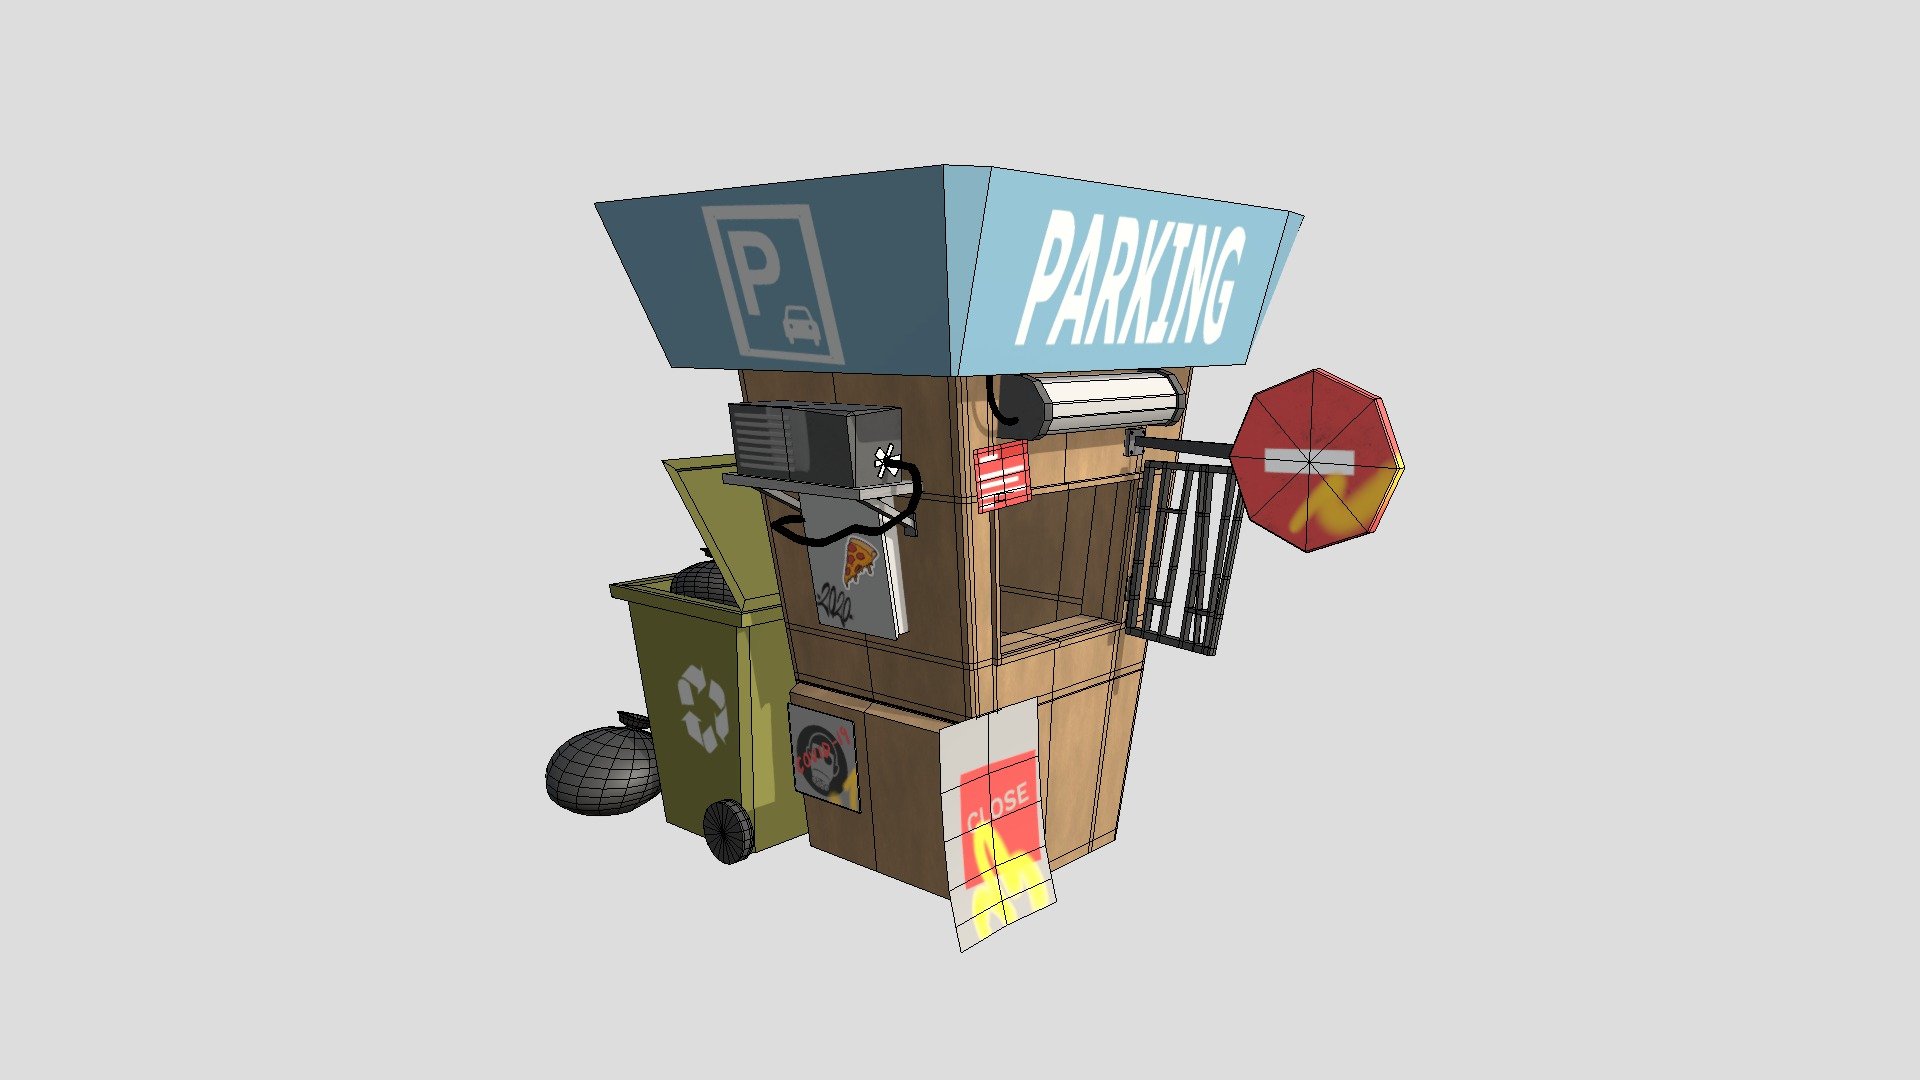 concept by Ido Yehimovitz - Parking Zone - 3D model by karydegollado 3d model